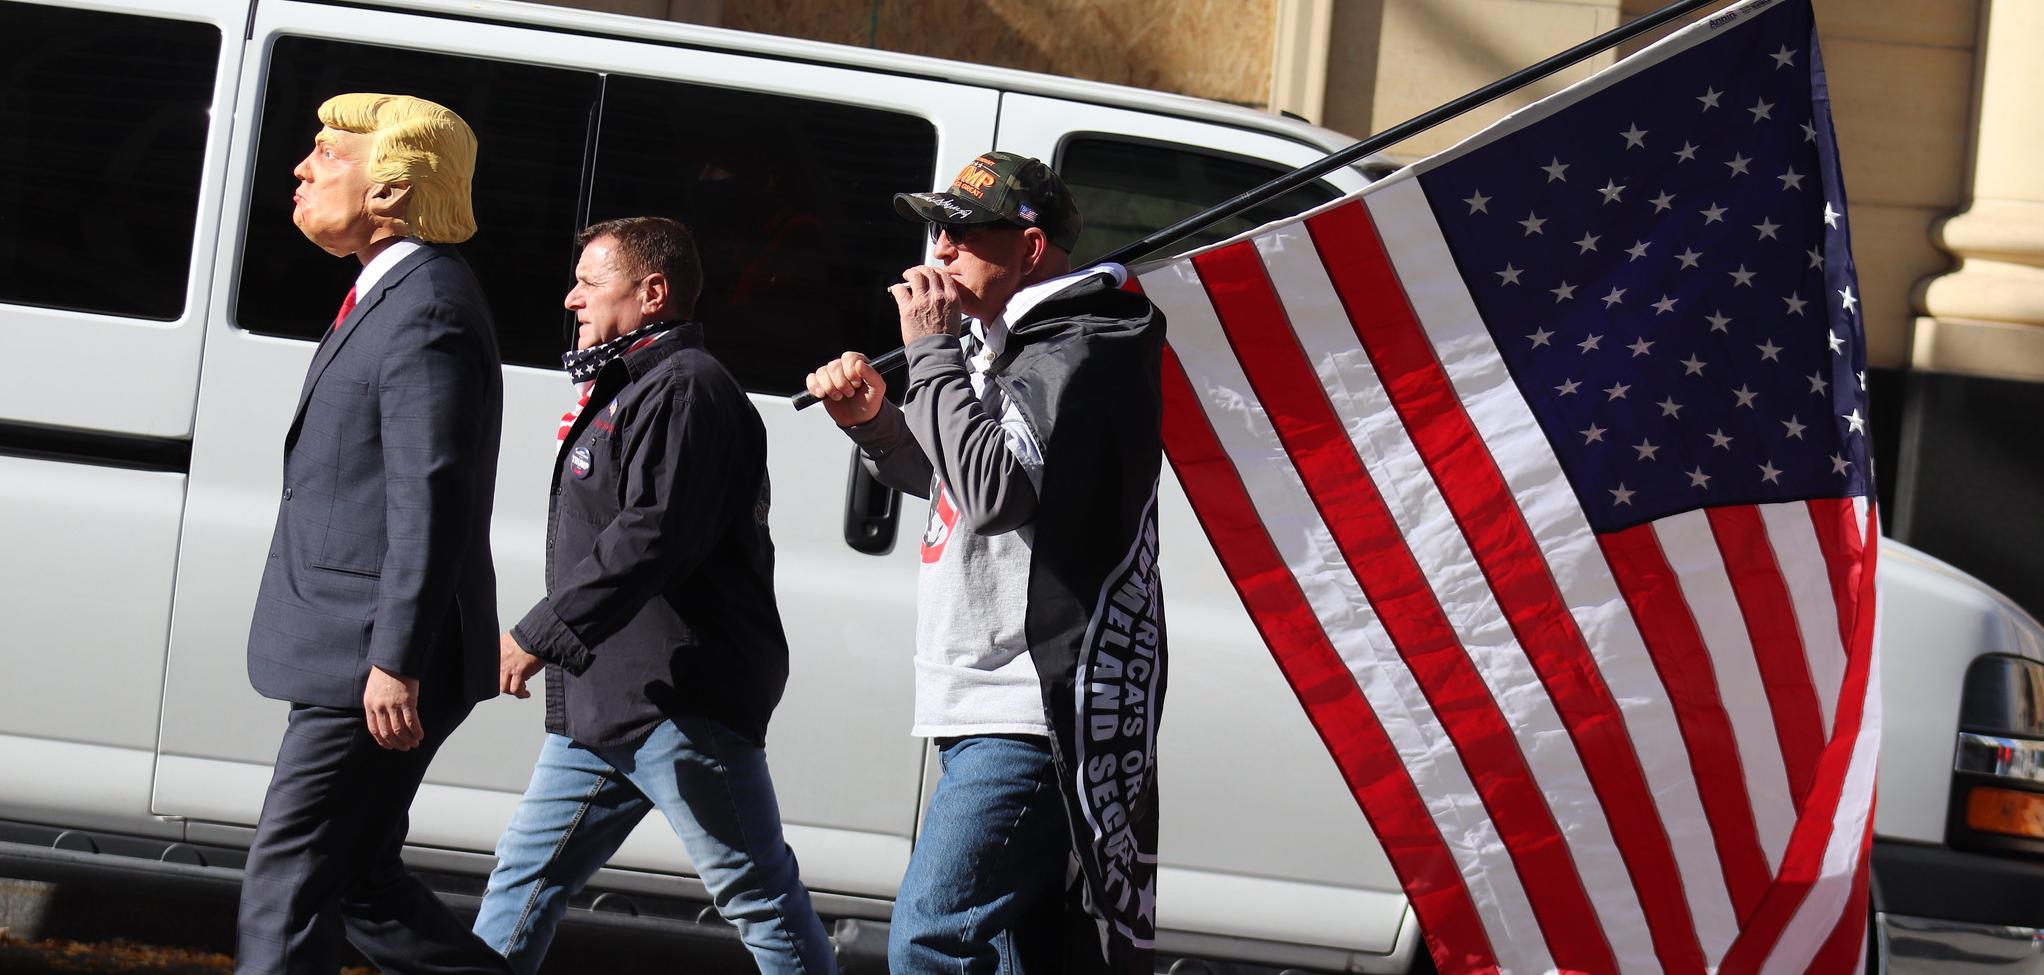 Three men walking; one wears a Trump mask and one carries an American flag